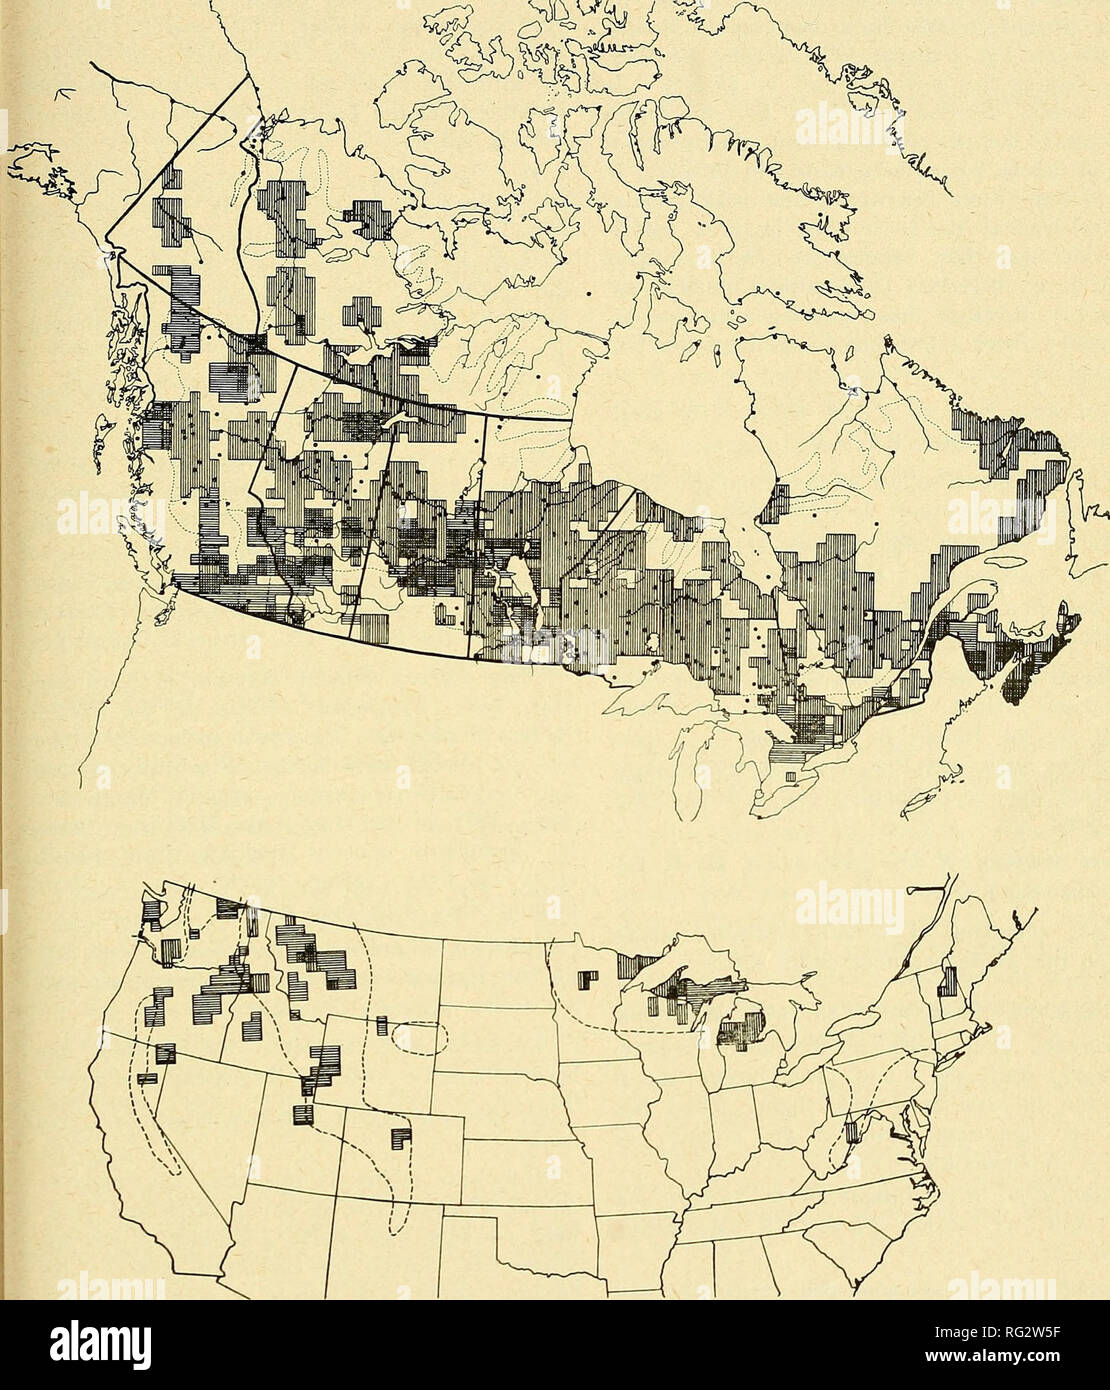 . The Canadian field-naturalist. May, 1937] The Canadian Field-Naturalist 67 ^^. ^'&quot;^ i. Fig 2. State of the snowshoe rabbit population in 1935-36. Vertical hatched areas, arc groups of squares overlapped bv areas of observers reporting relative DECREASE in 1935-36 over 1934-35. Horizontally hatched areas, NO CHANGE. Large black dots are Hudson's Bay Company posts, etc. (1927 map). Broken lines in Canada show main vegetation zones. Broken lines in the United States shoiv approximate limits o1 snowshoe rabbit species. Thick black lines are Province or State boundaries.. Please note that th Stock Photo